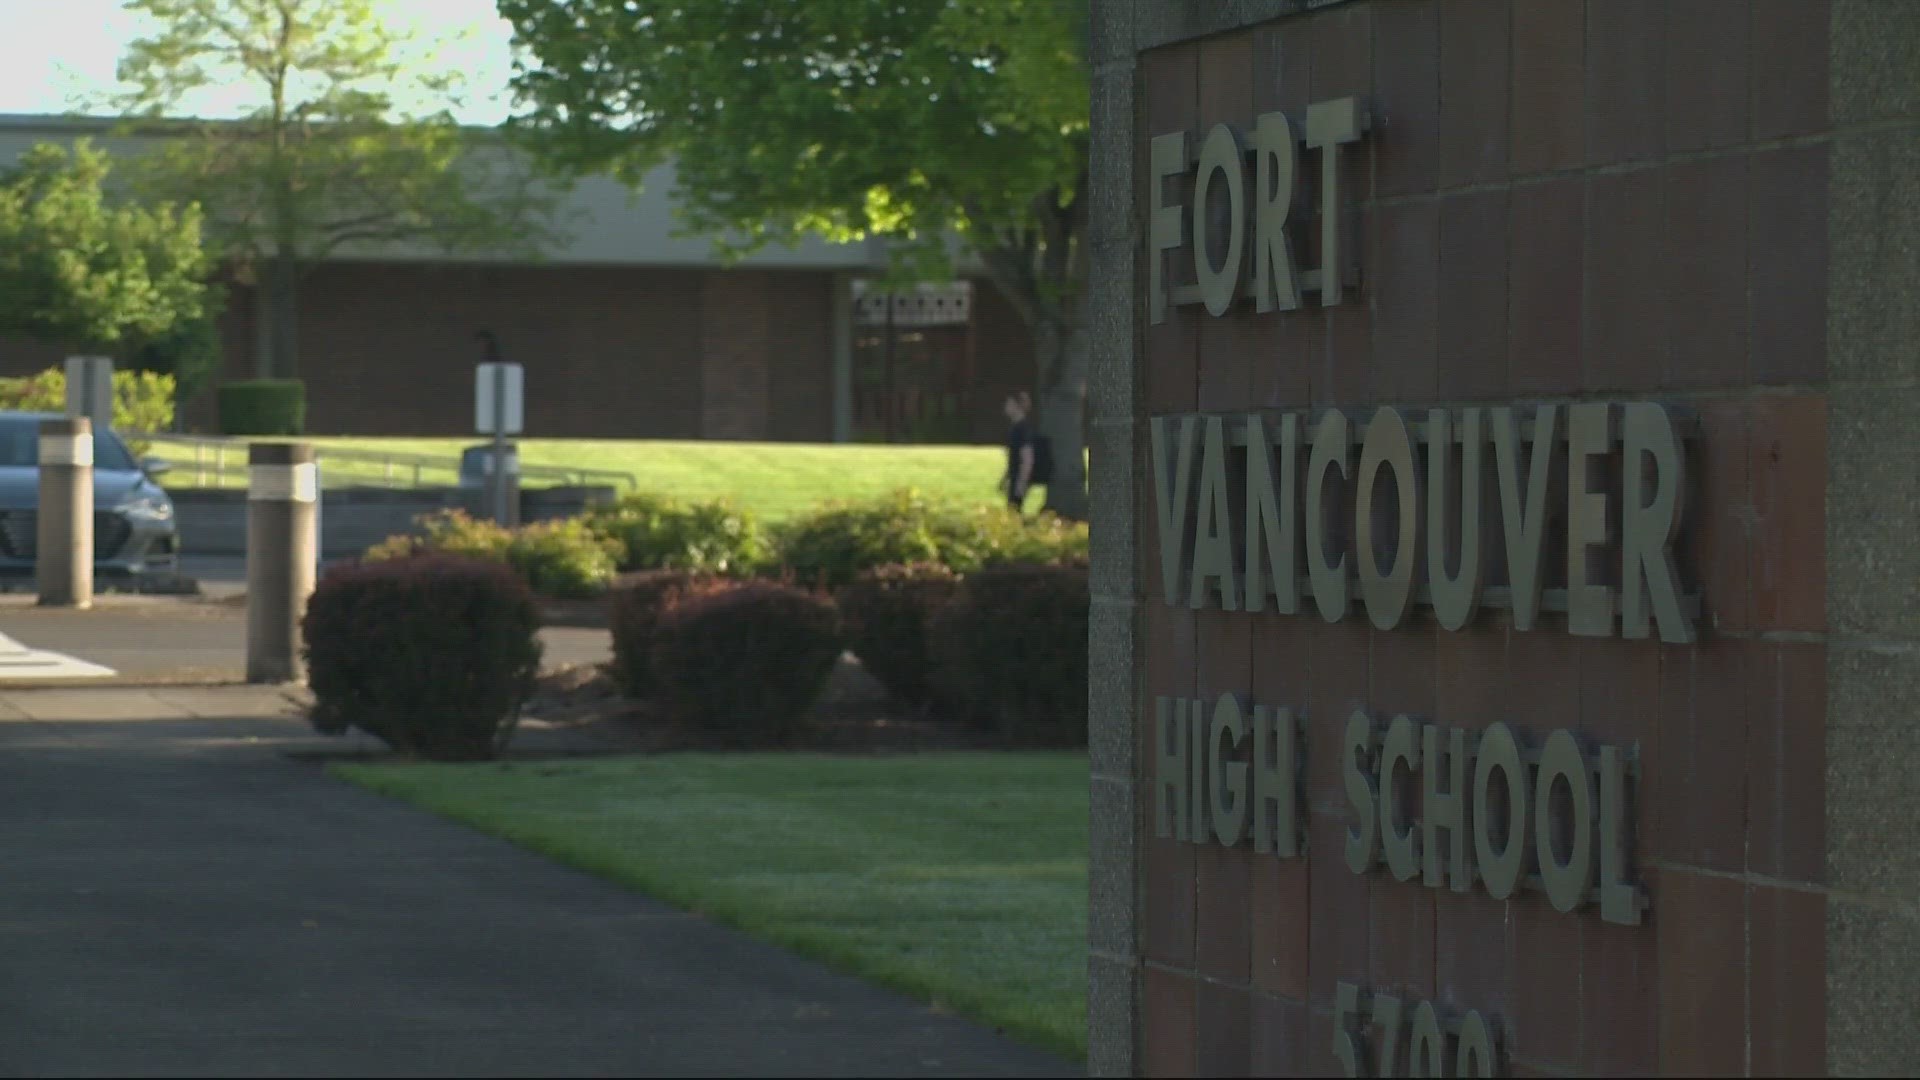 The Vancouver School Board has proposed a later start time for high school students to address sleep and issues among teens and a bus driver shortage.